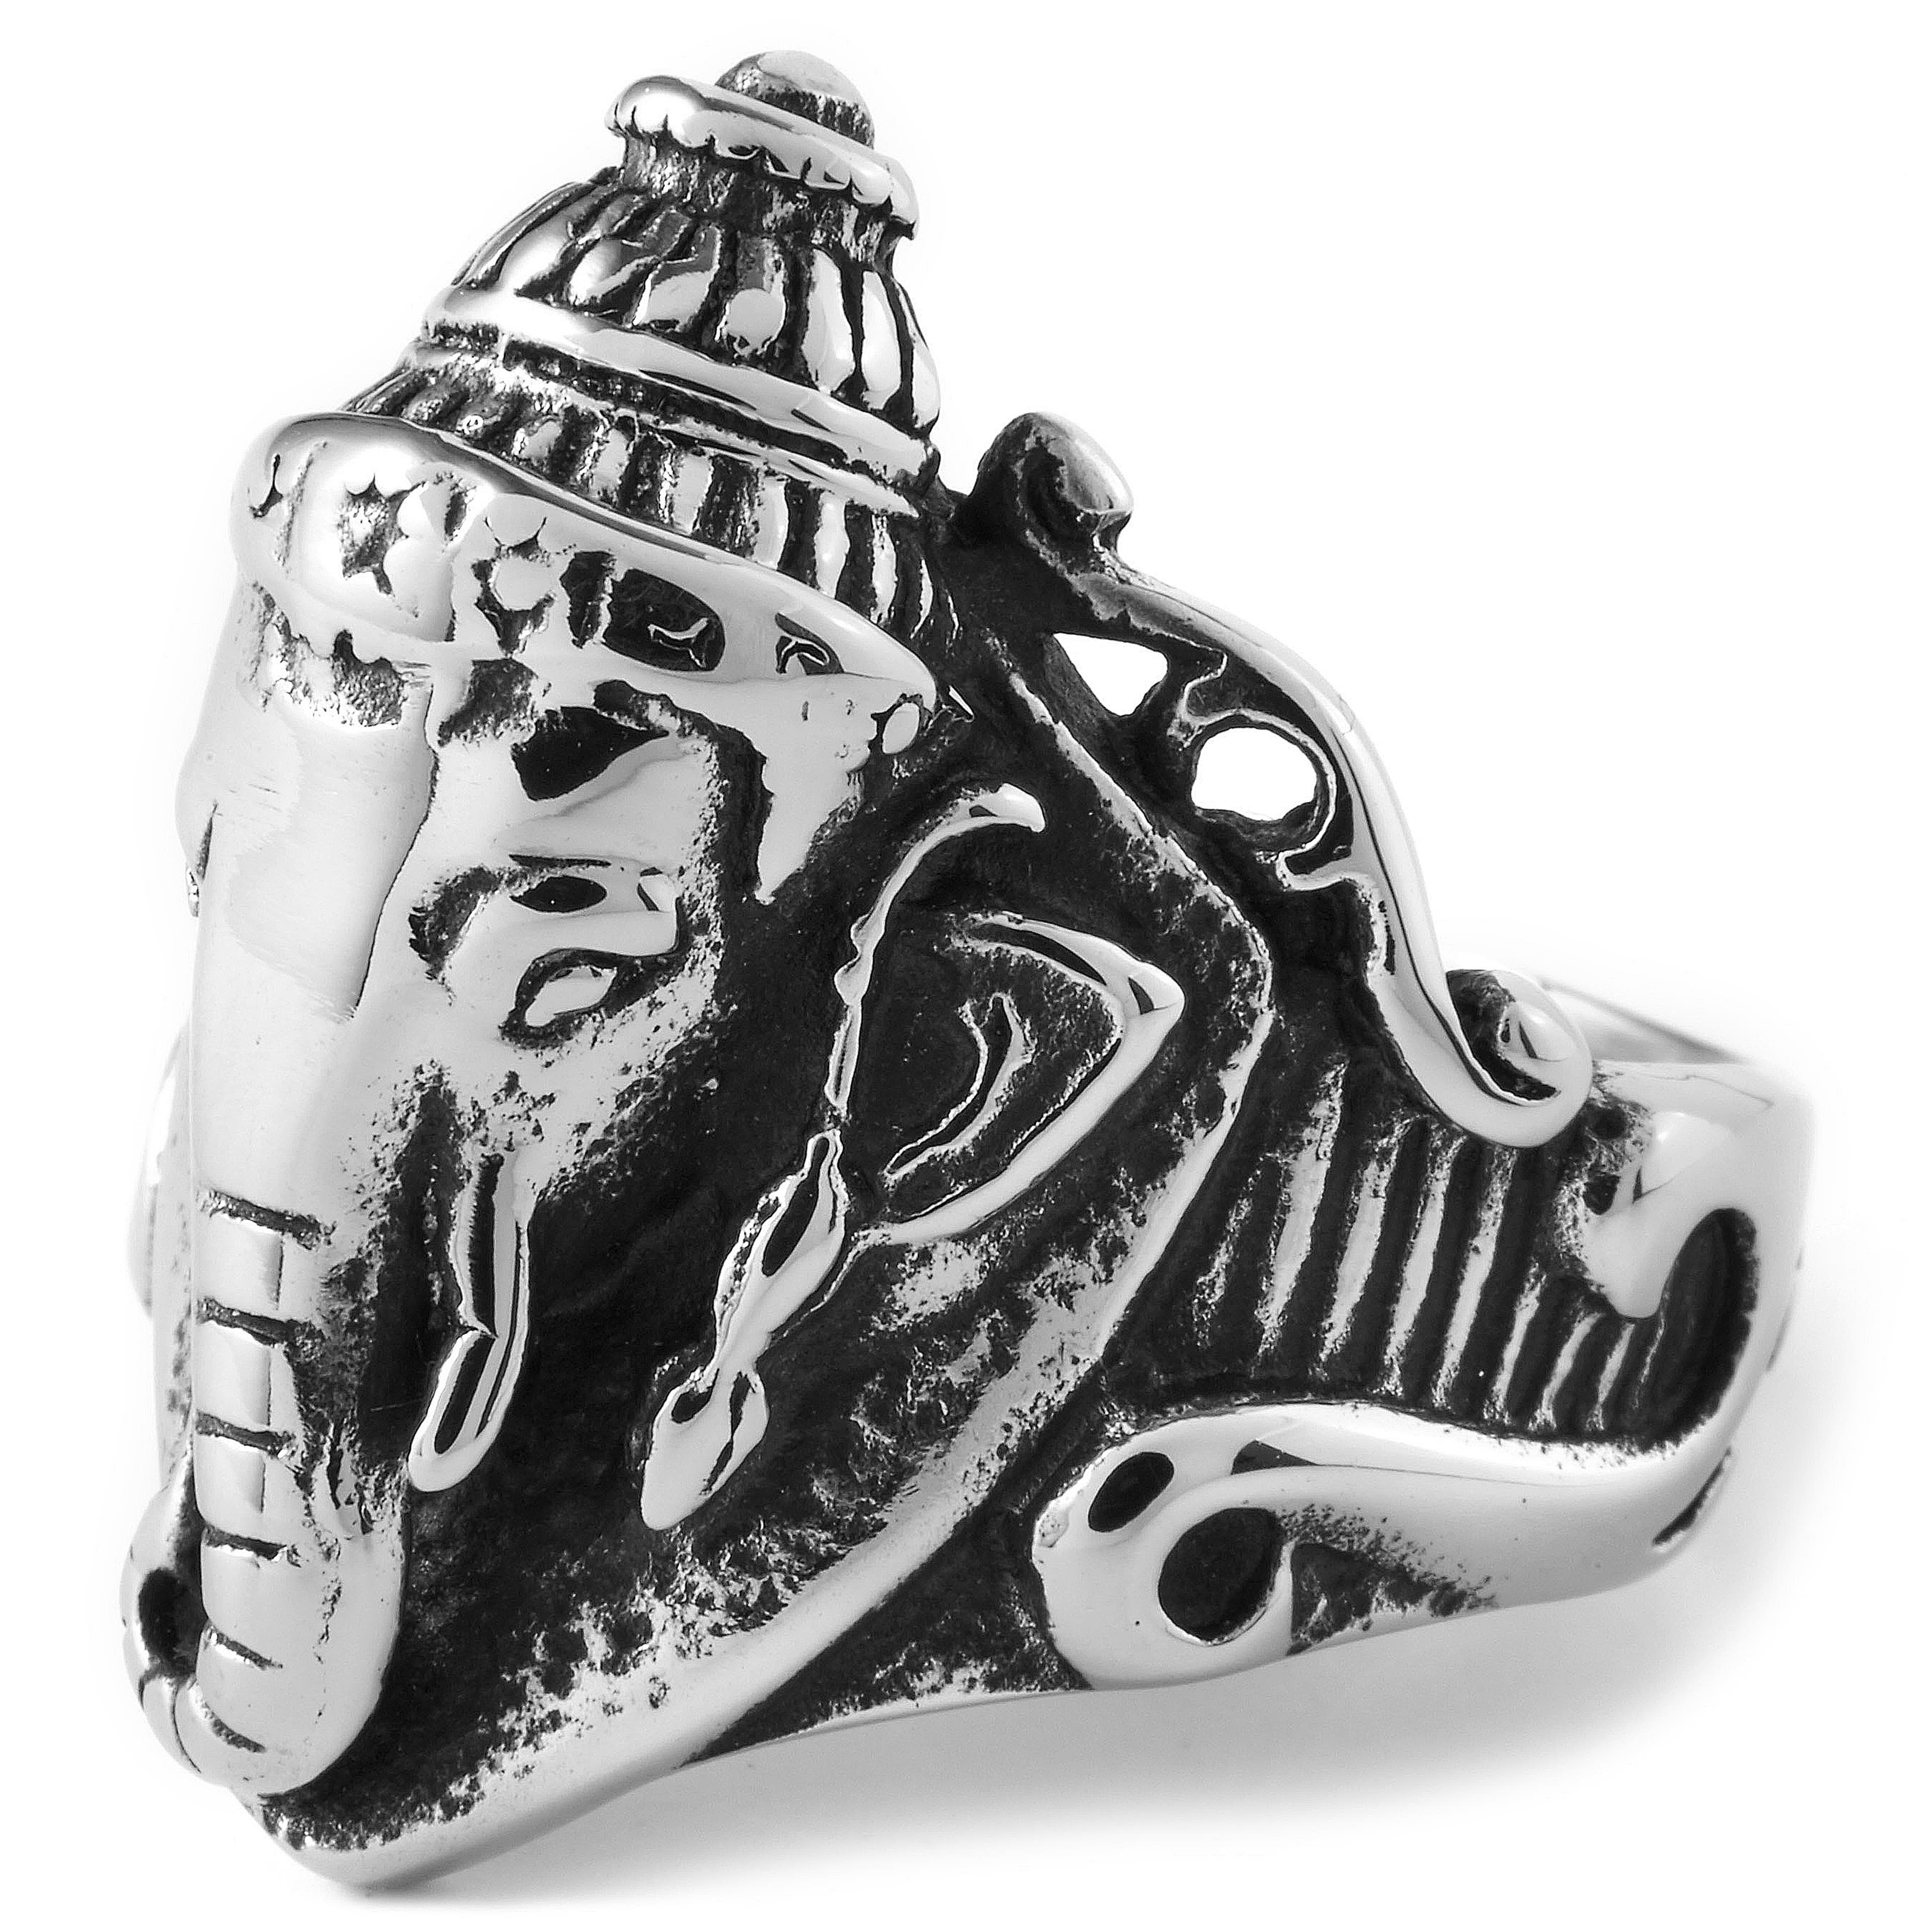 Silver-Tone & Black Stainless Steel Elephant Emperor Ring